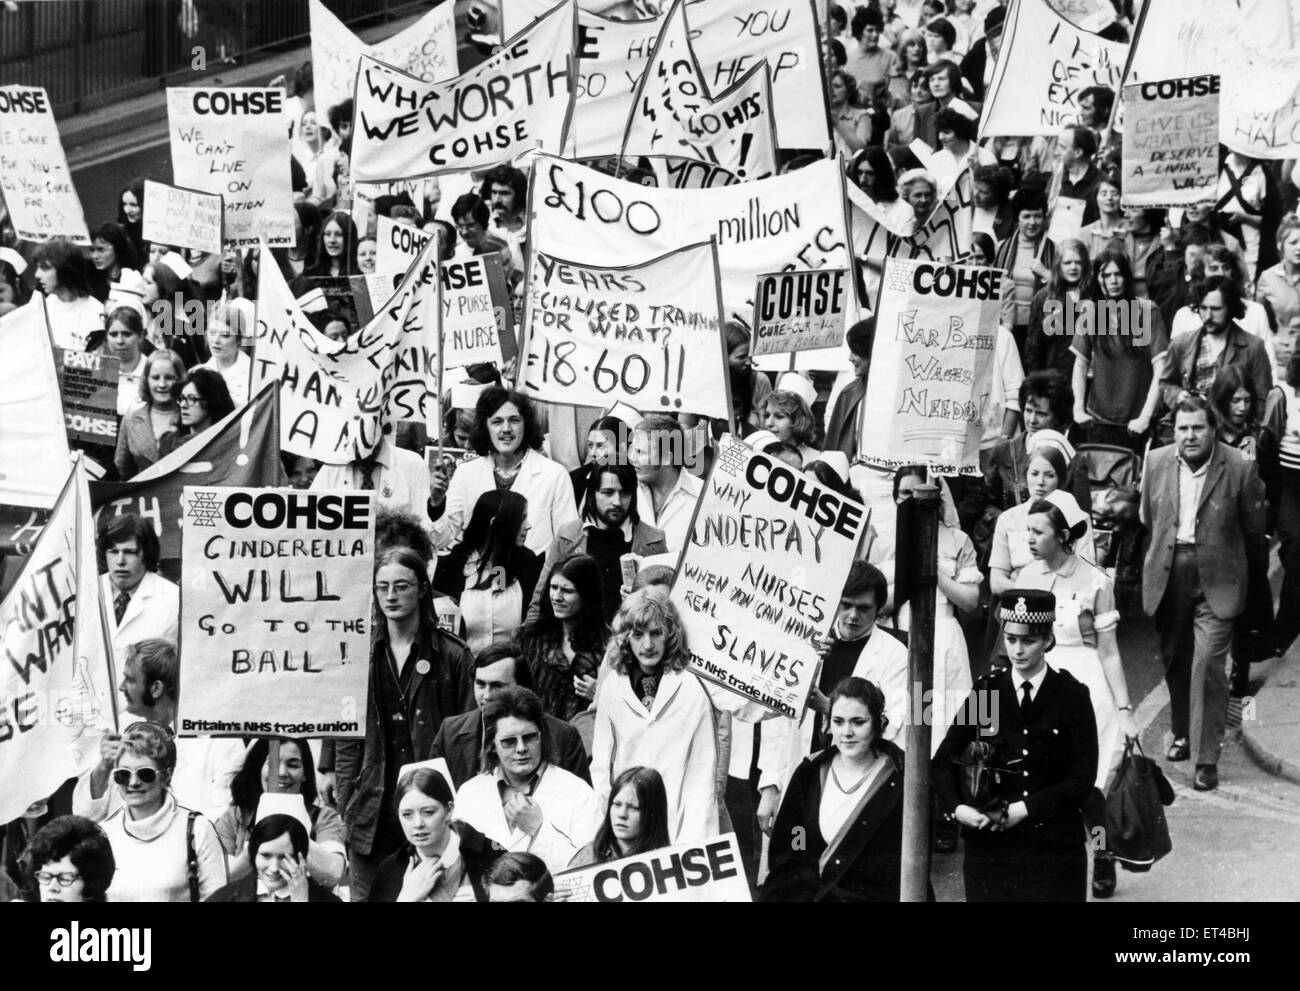 Nurses Protest march about Wages, Grainger Street, Newcastle, 18th May 1974. CINDERELLA WILL GO TO THE BALL. FAR BETTER WAGES NEEDED. Stock Photo